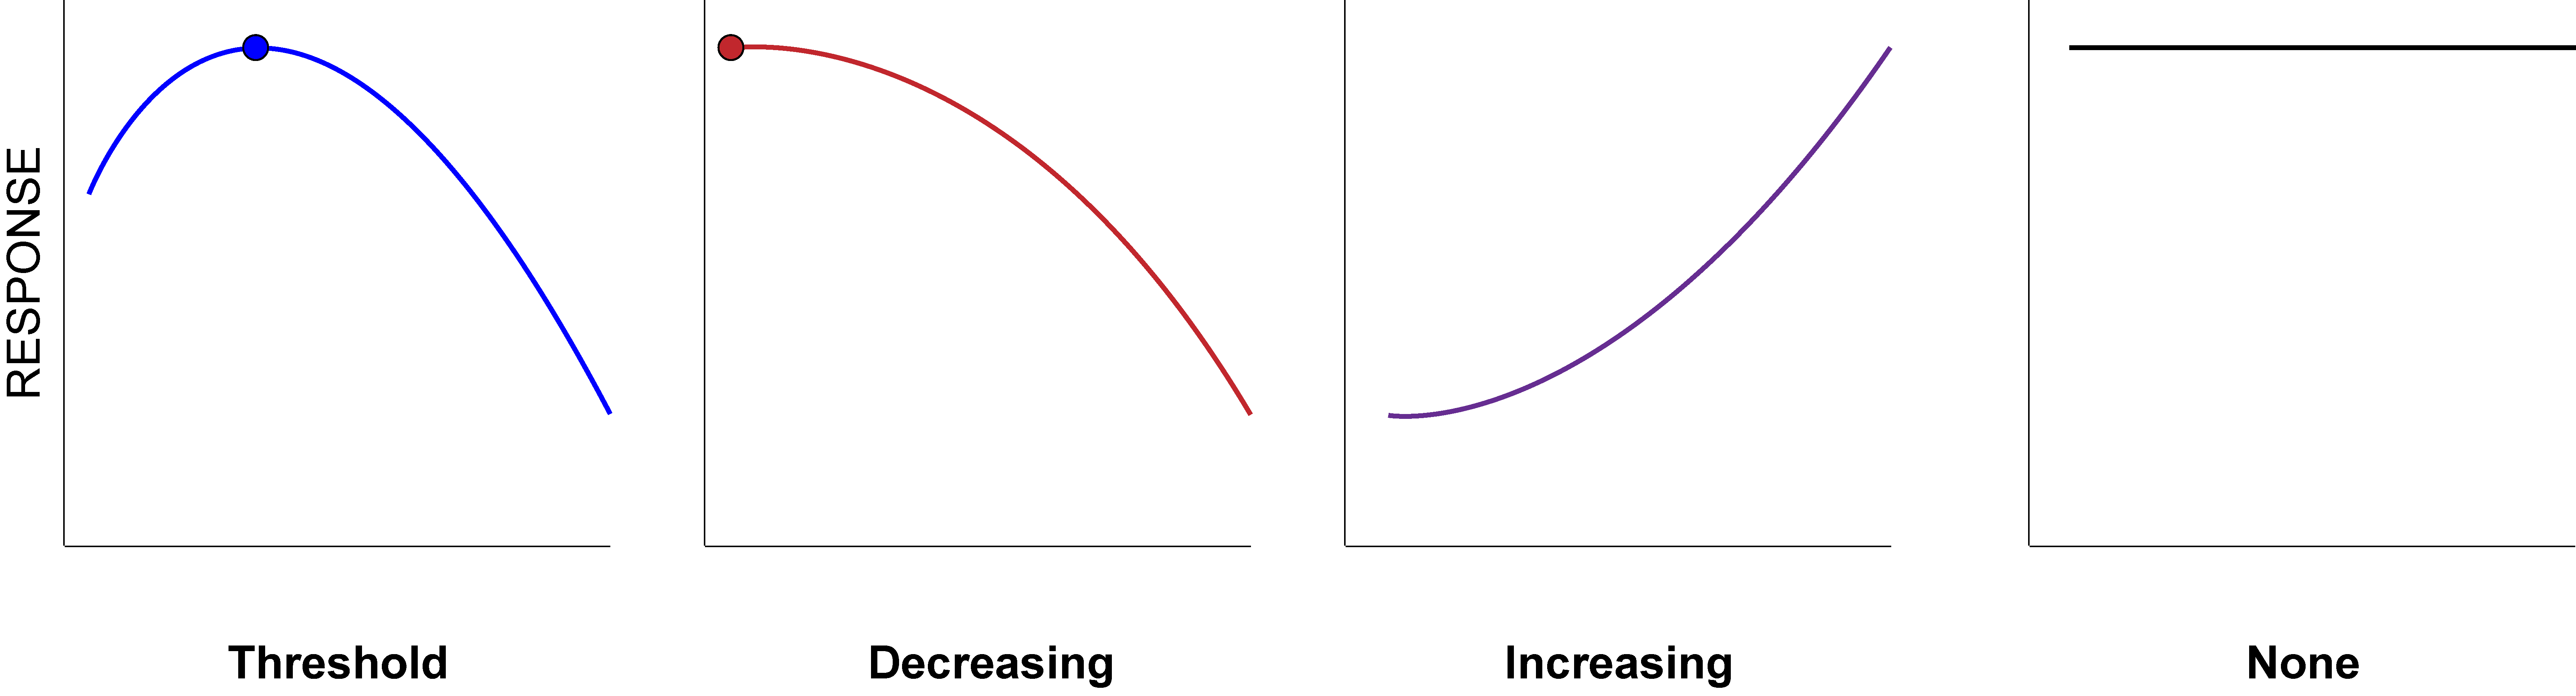 Four charts displaying four different types of response curves (threshold, decreasing, increasing, and none).